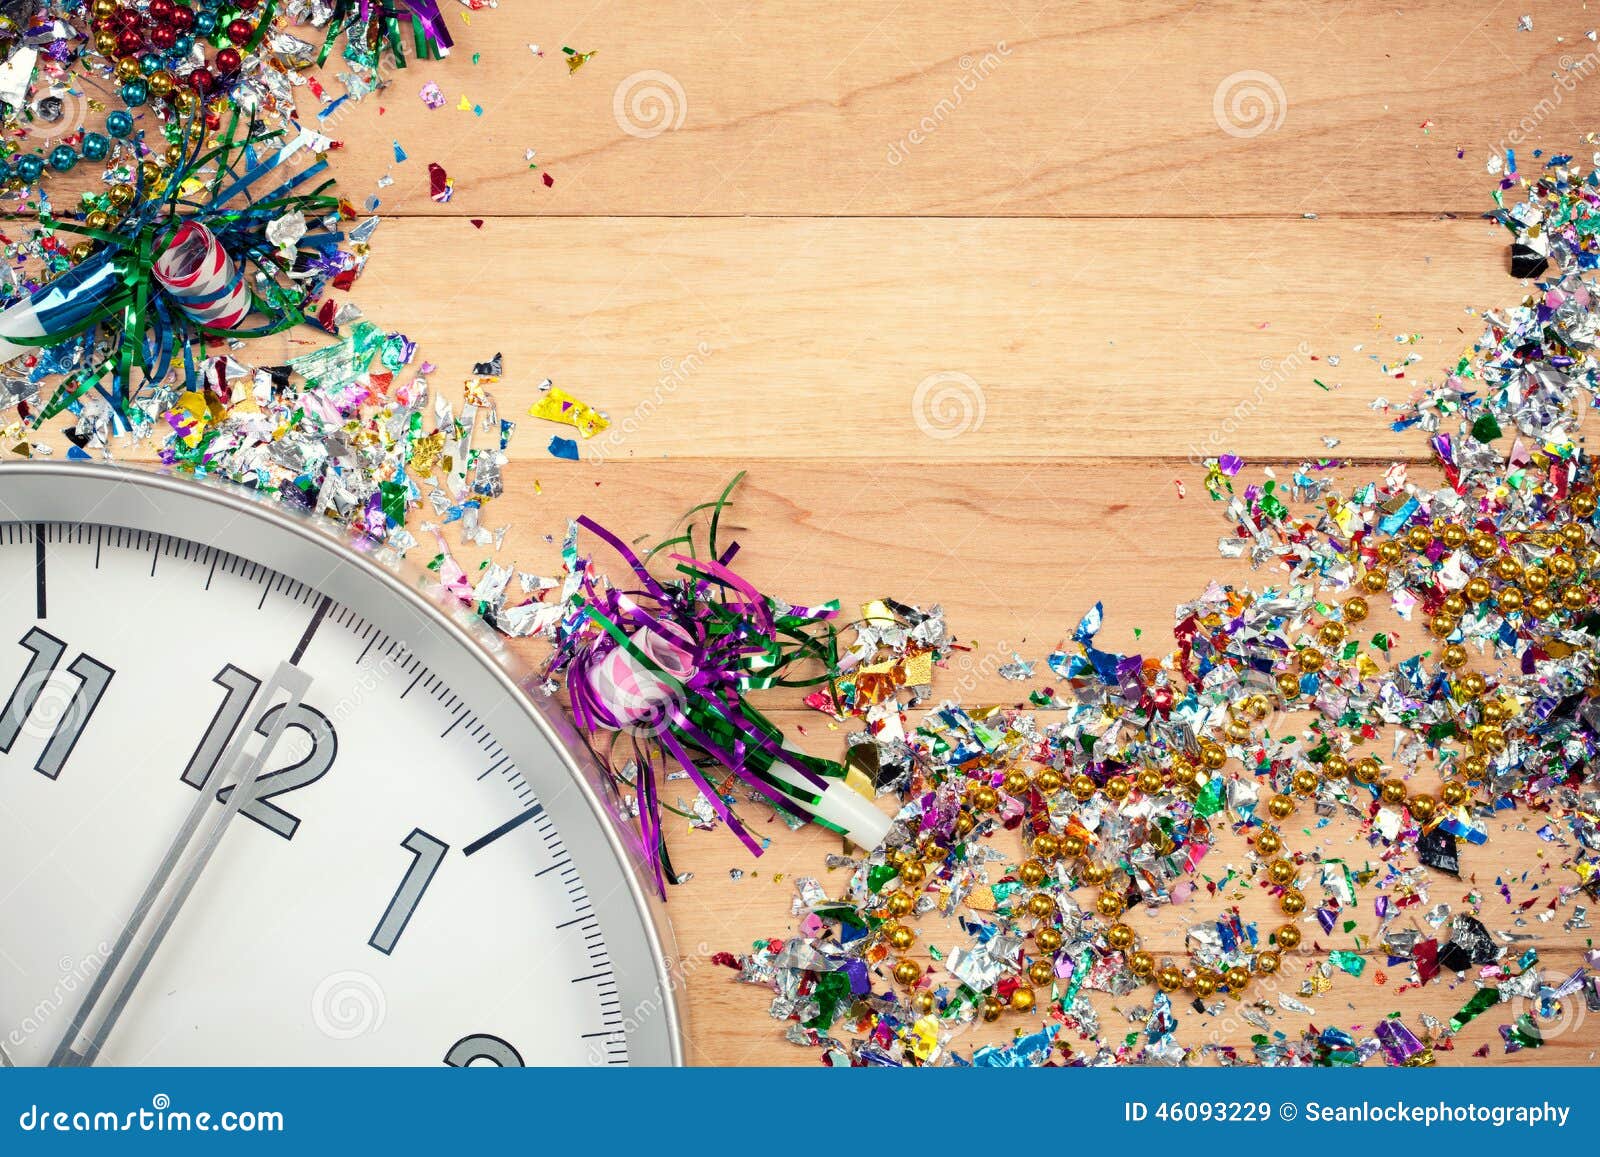 New Year S: New Year Party Celebration Background Stock Image - Image of  beads, necklace: 46093229